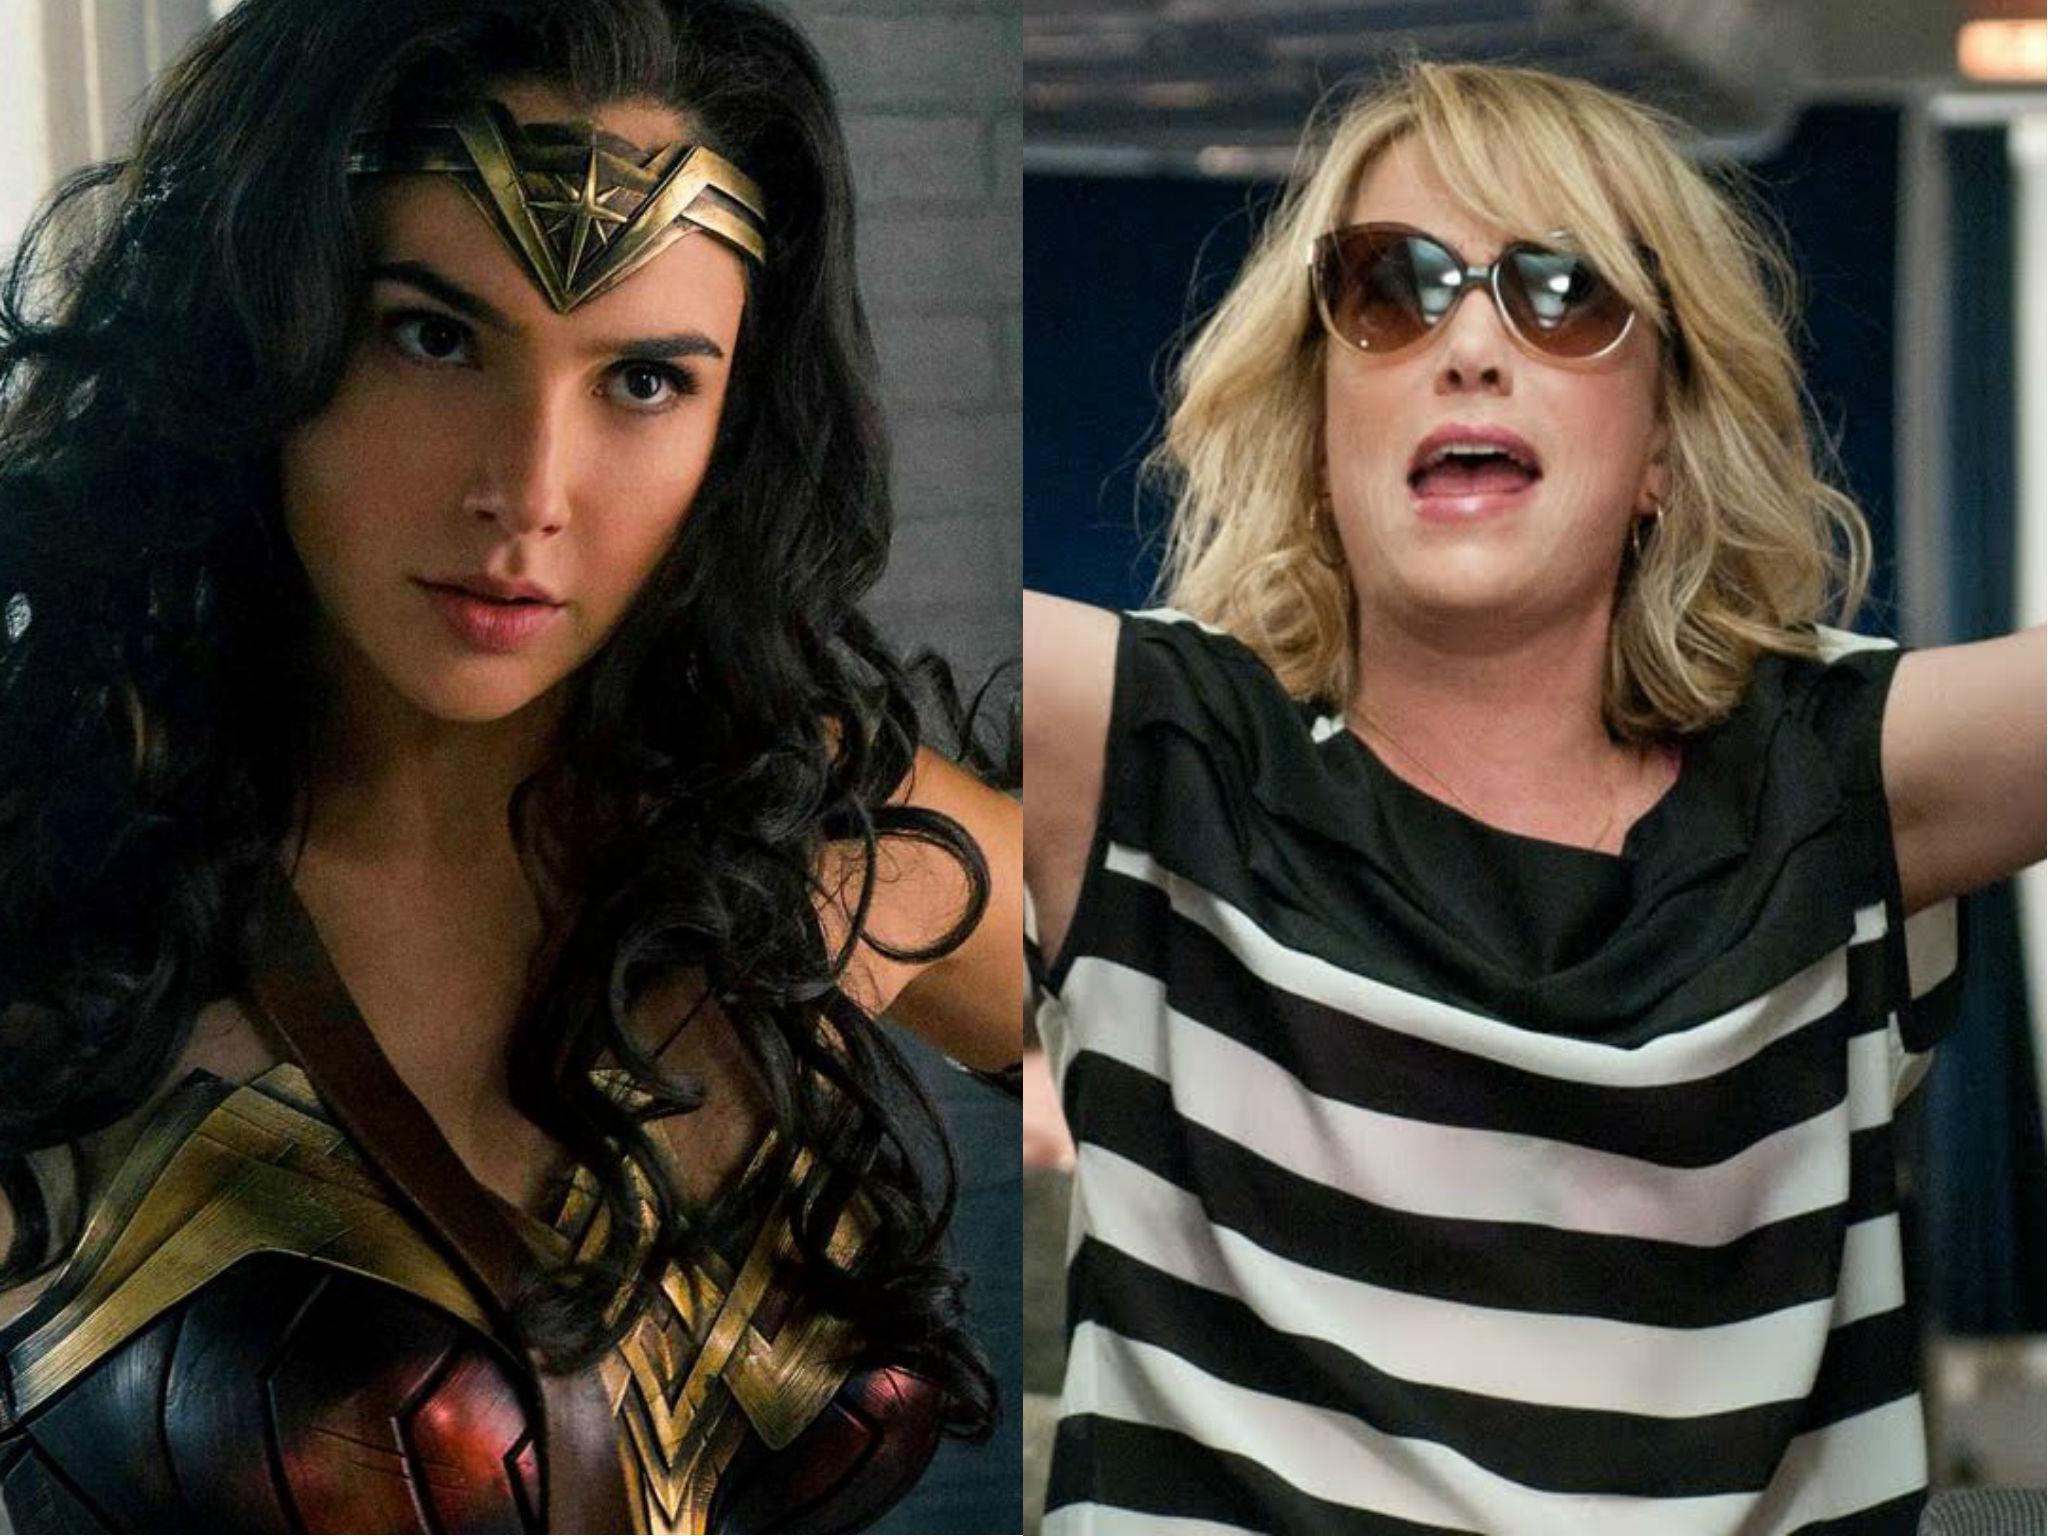 When is Wonder Woman 1984 released and who is in the cast?